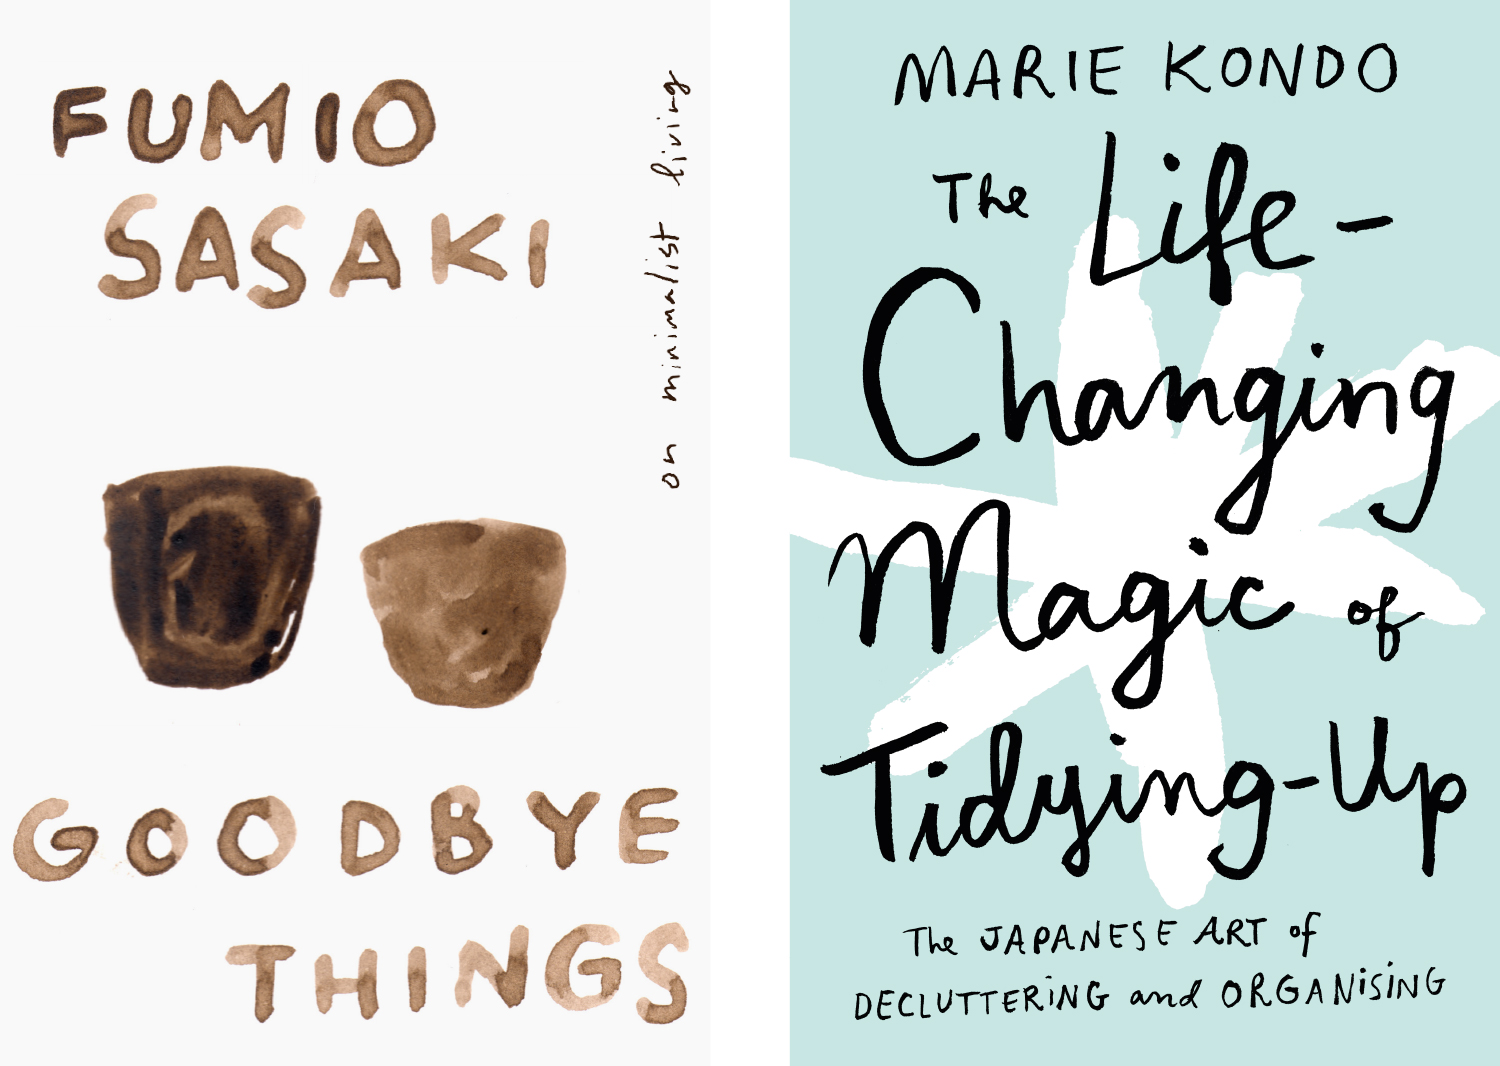 Goodbye Things and Marie Kondo personal covers